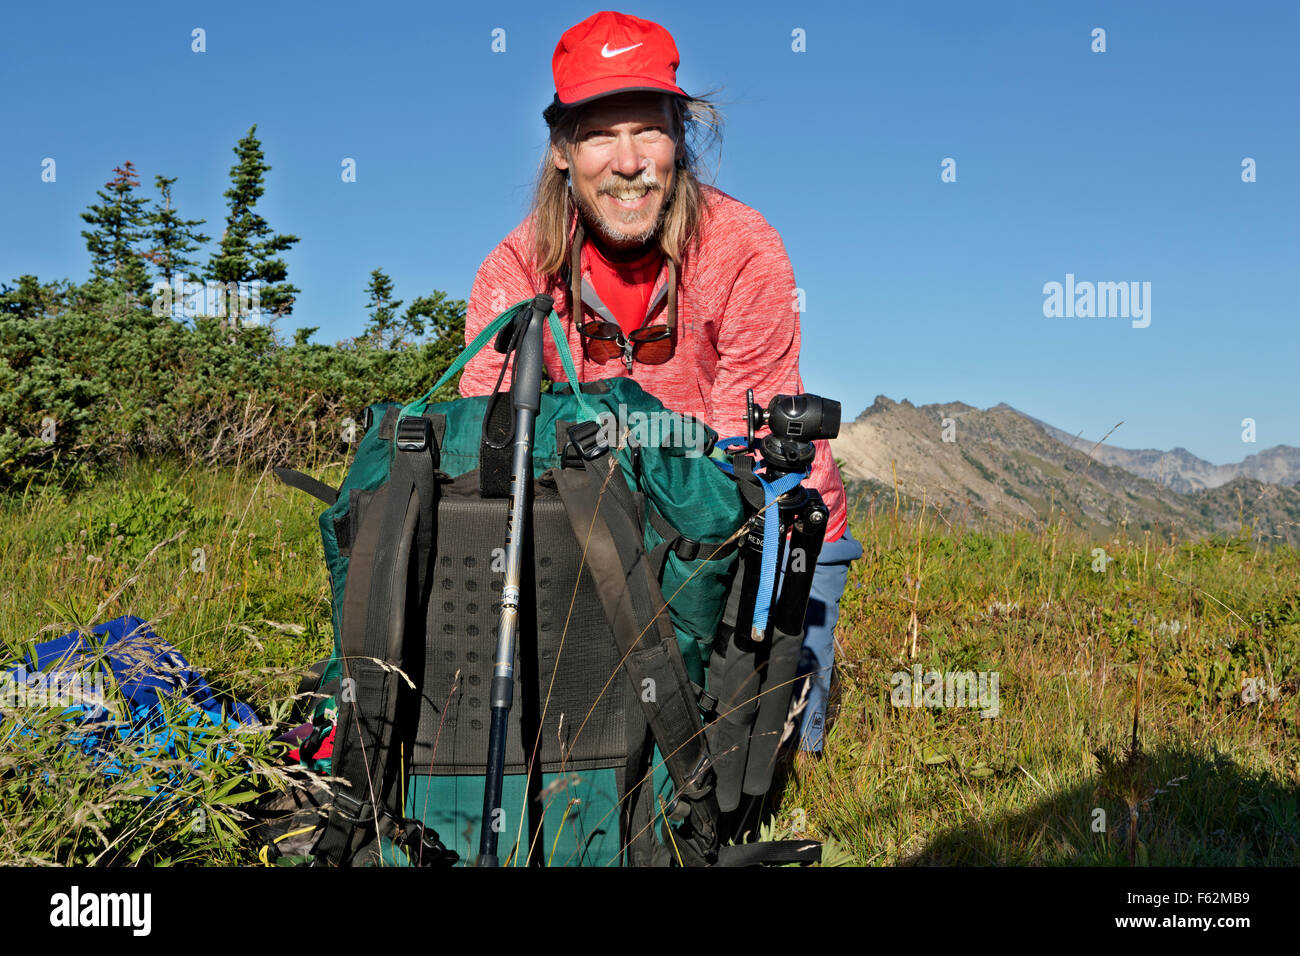 WA10902-00...WASHINGTON - Unpacking at a campsite along the crest of Liberty Cap in the Glacier Peak Wilderness area. Stock Photo